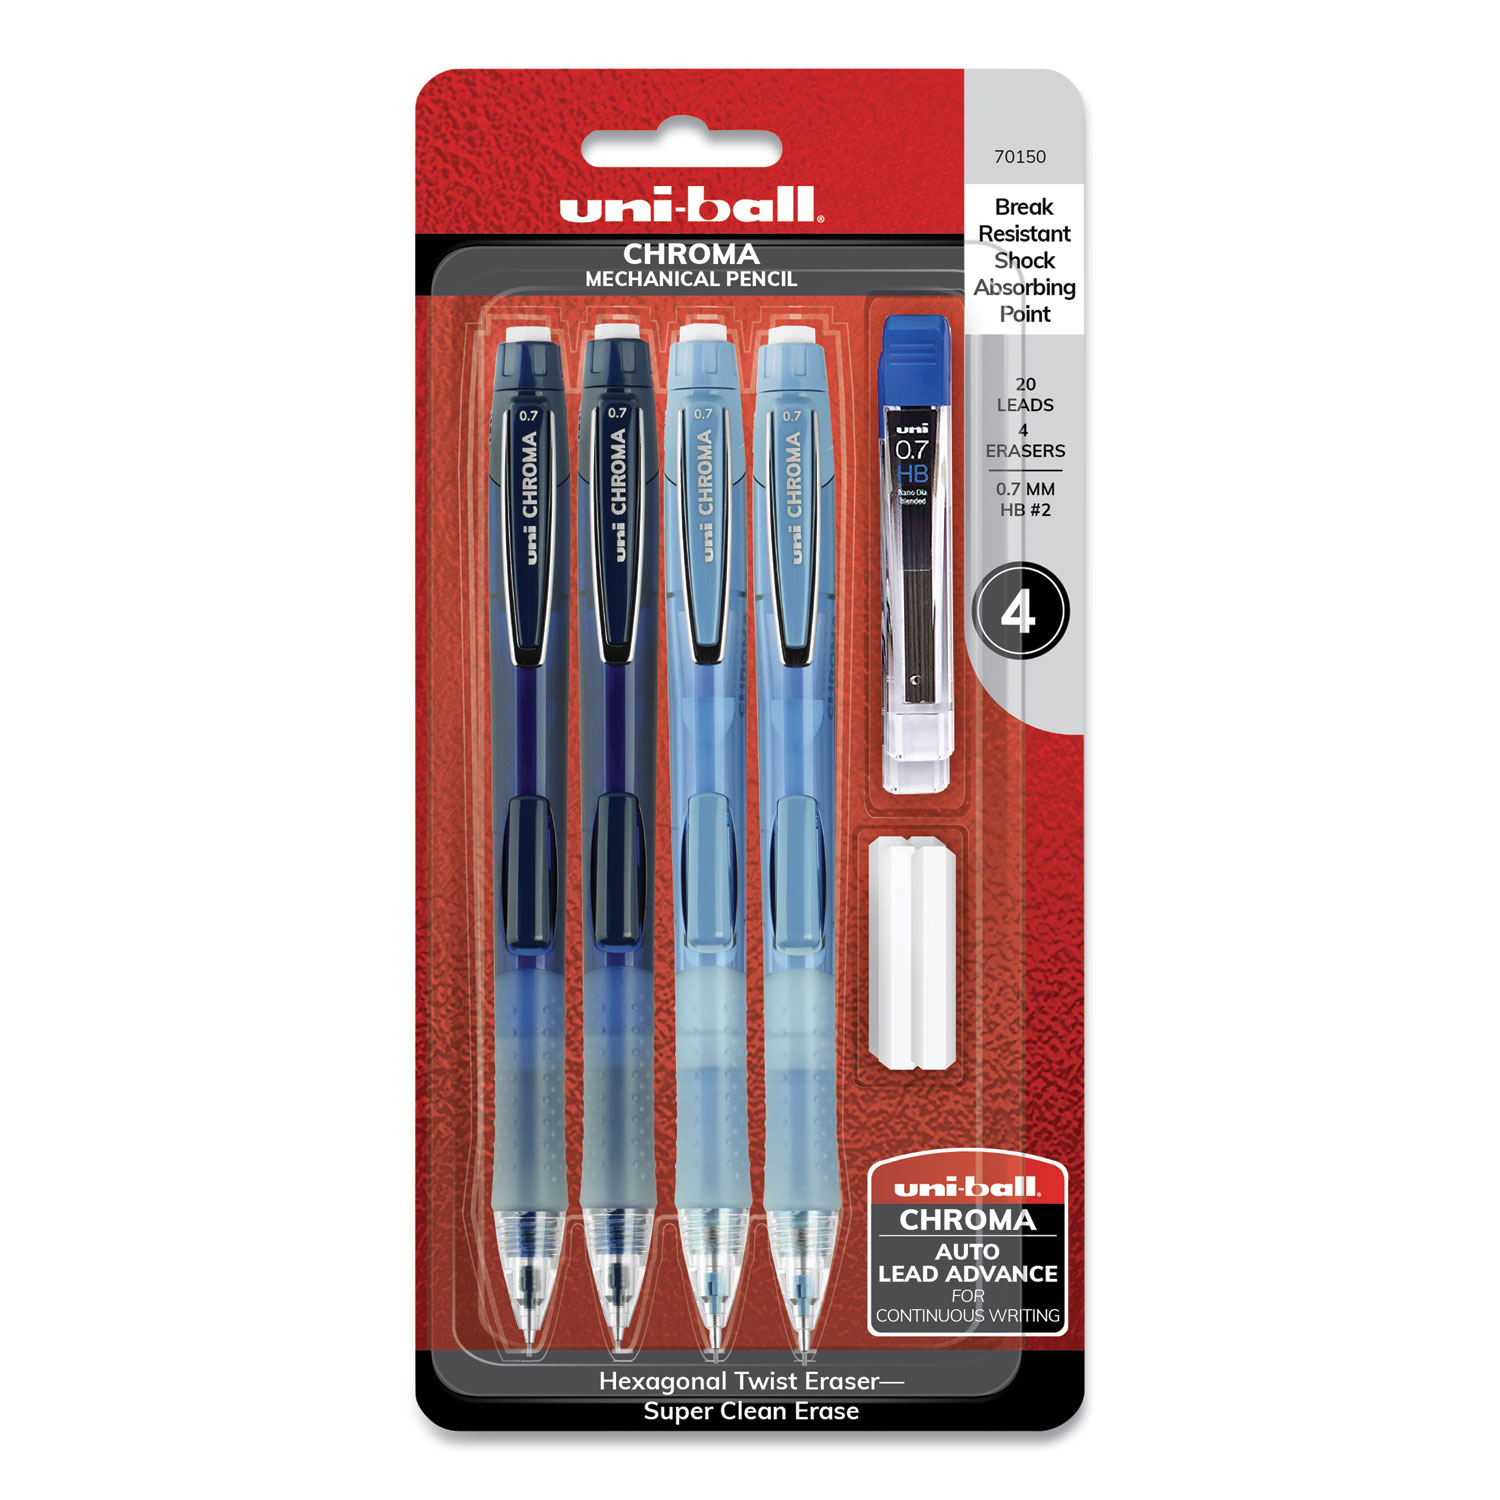  uni-ball 70150 Chroma Mechanical Pencil woth Leasd and Eraser Refills, 0.7 mm, HB (#2), Black Lead, Assorted Barrel Colors, 4/Set (UBC70150) 